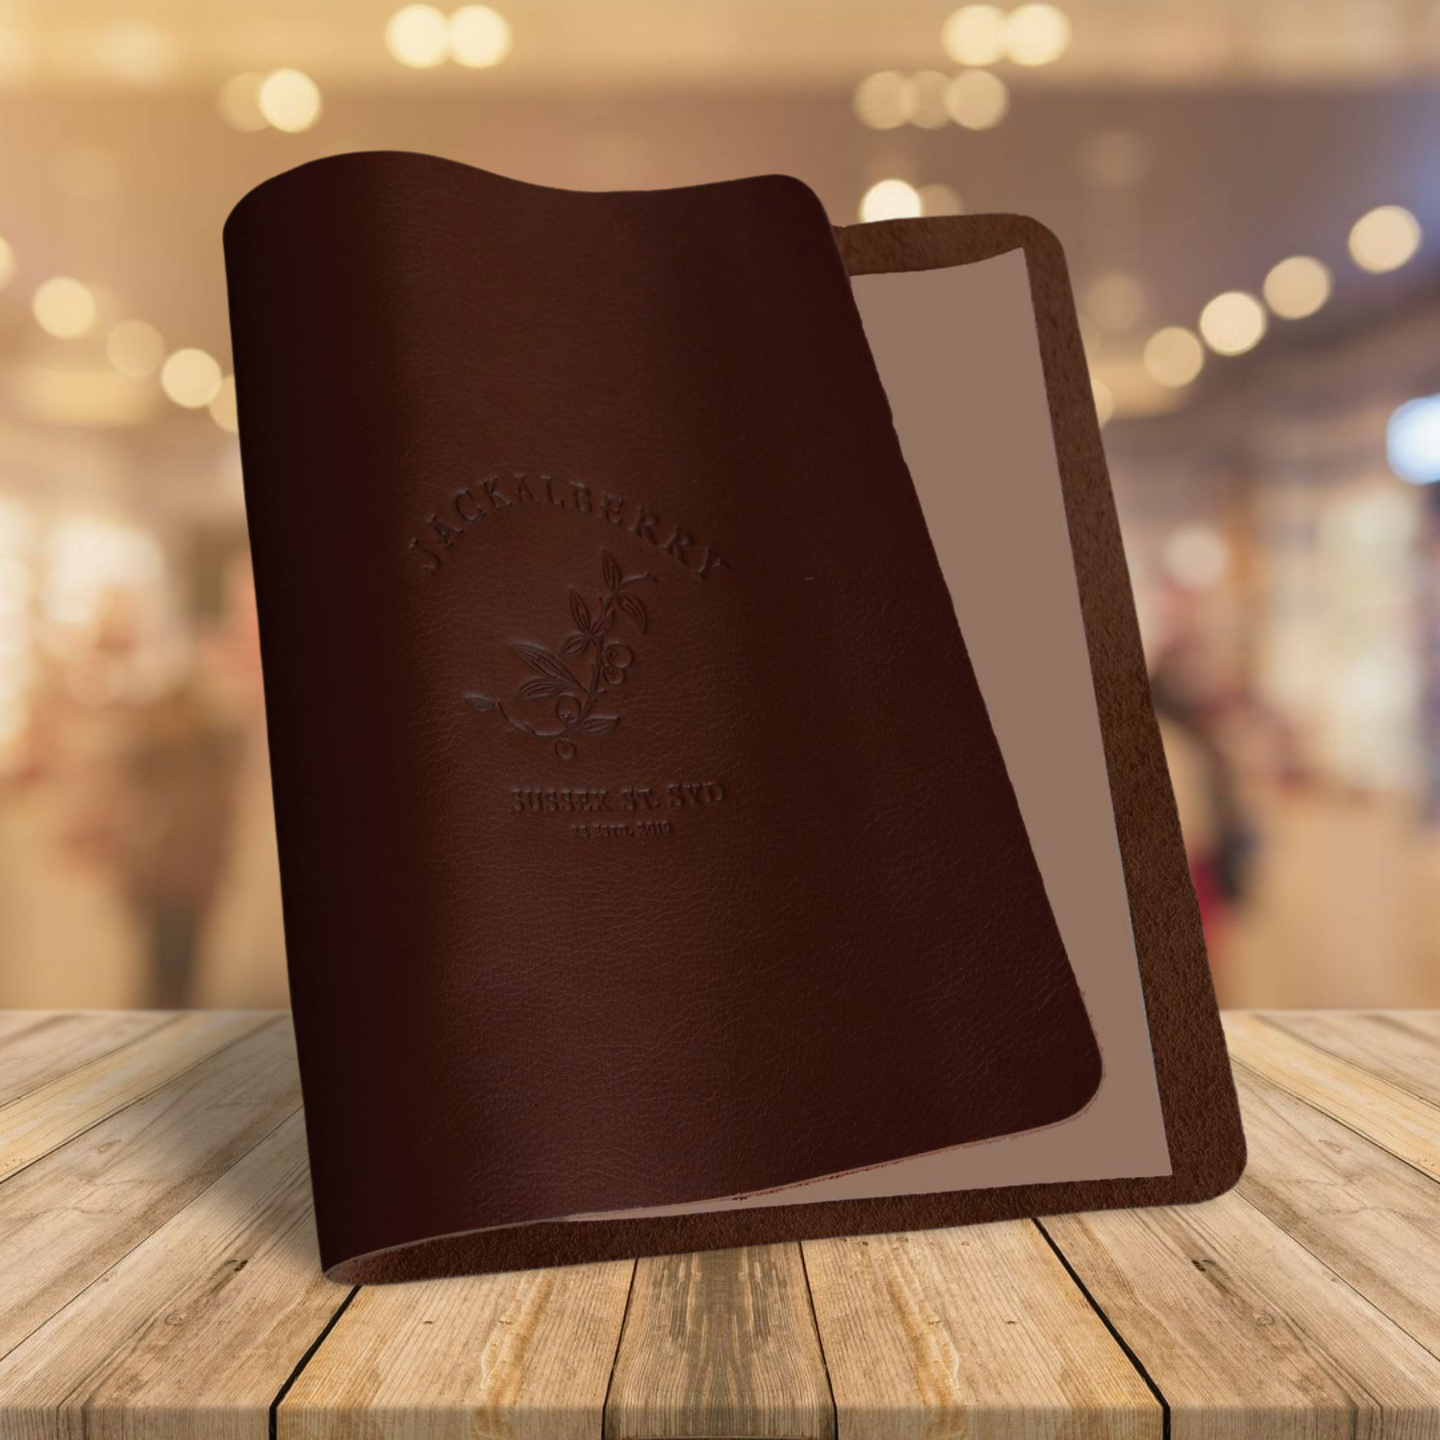 What impact would a beautiful leather restaurant menu cover have on your brand image?